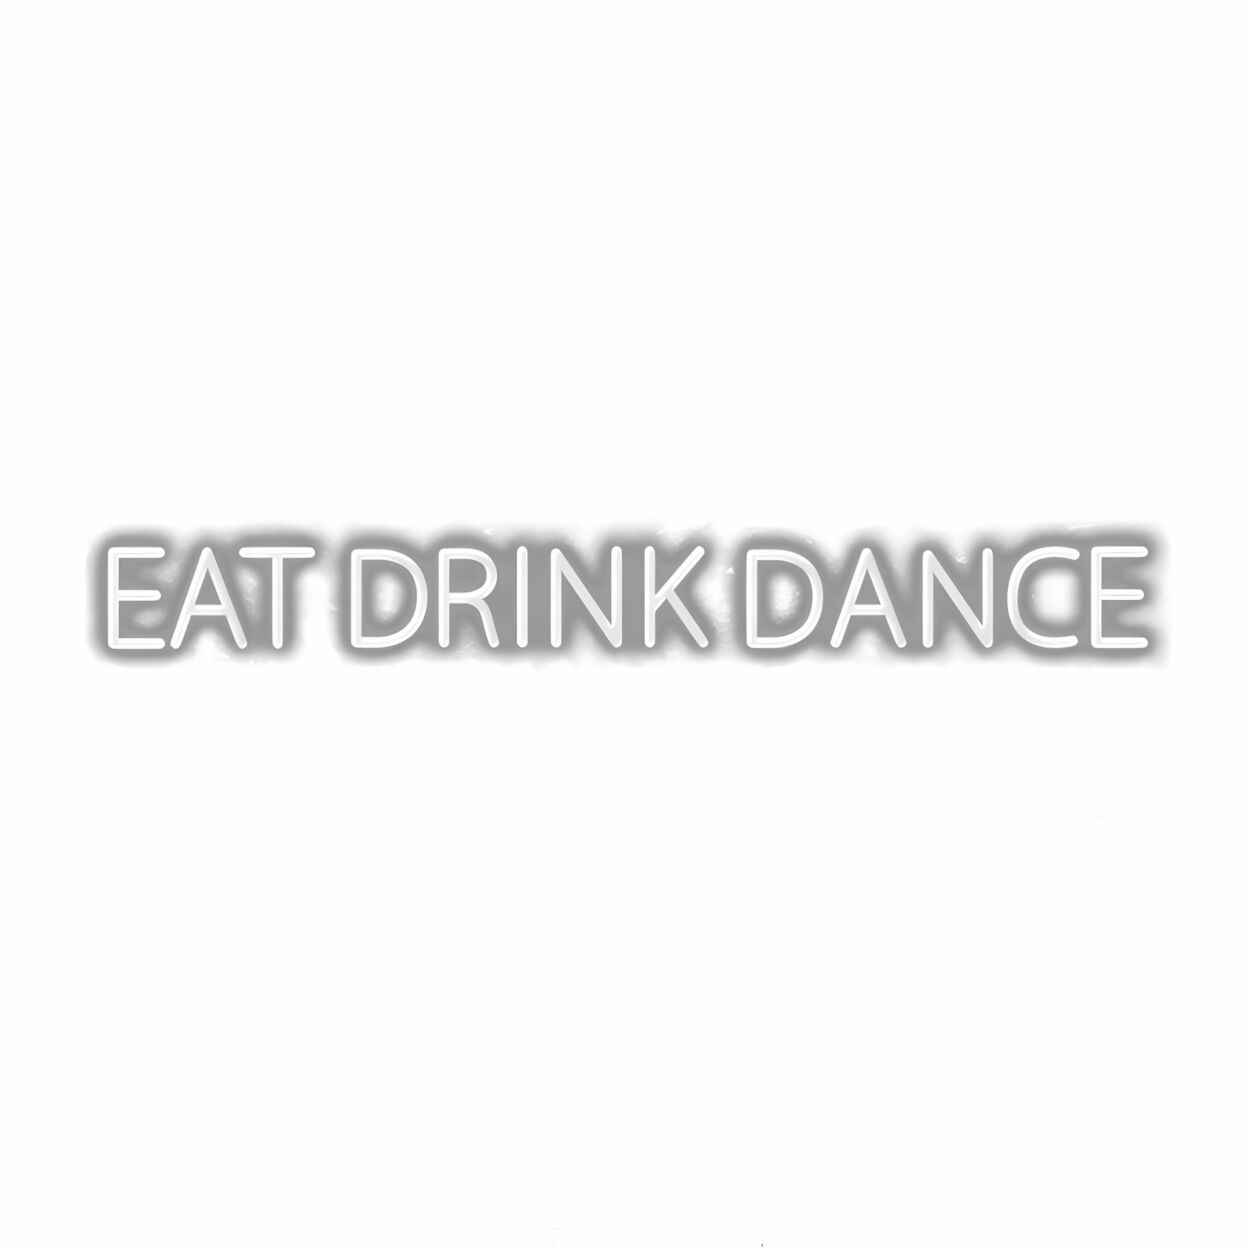 Eat Drink Dance" white embossed text on gray background.